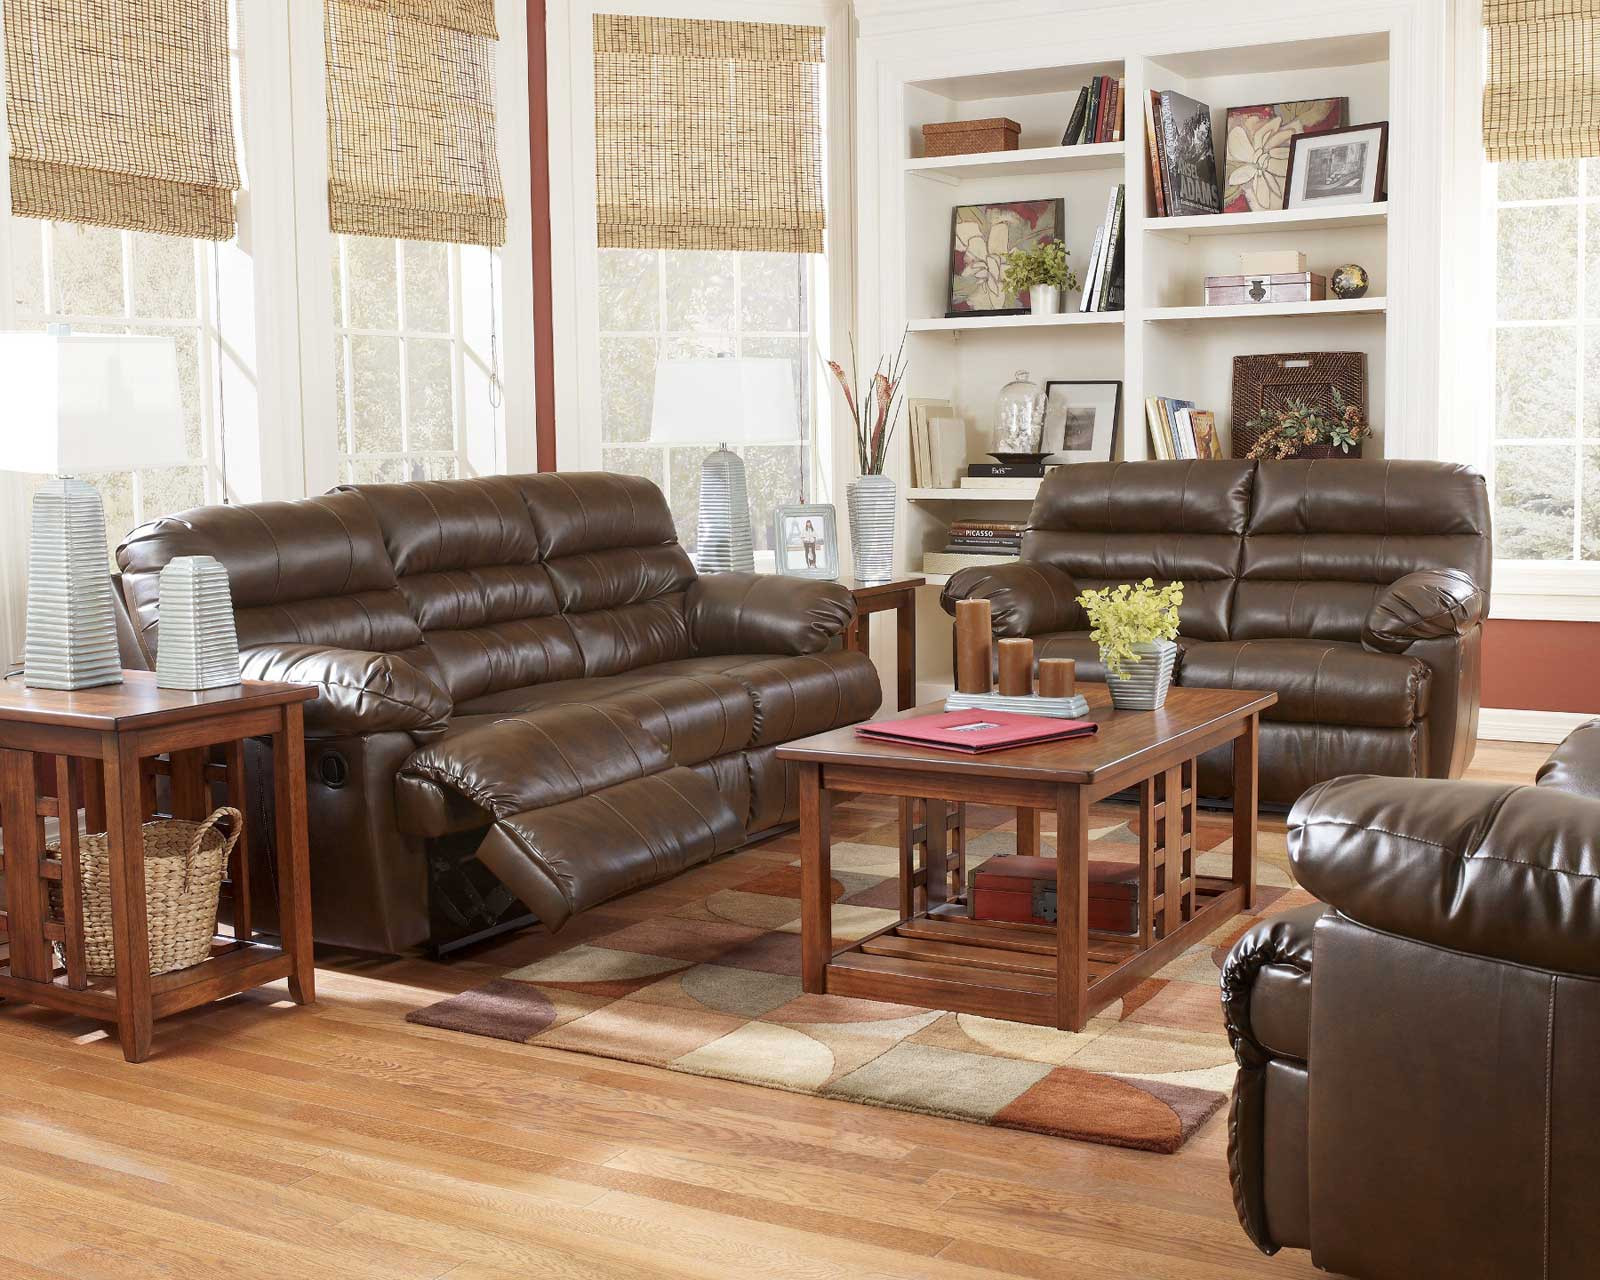 Rustic Leather Living Room Furniture
 Beautiful Living Room Sets As Suitable Furniture Amaza